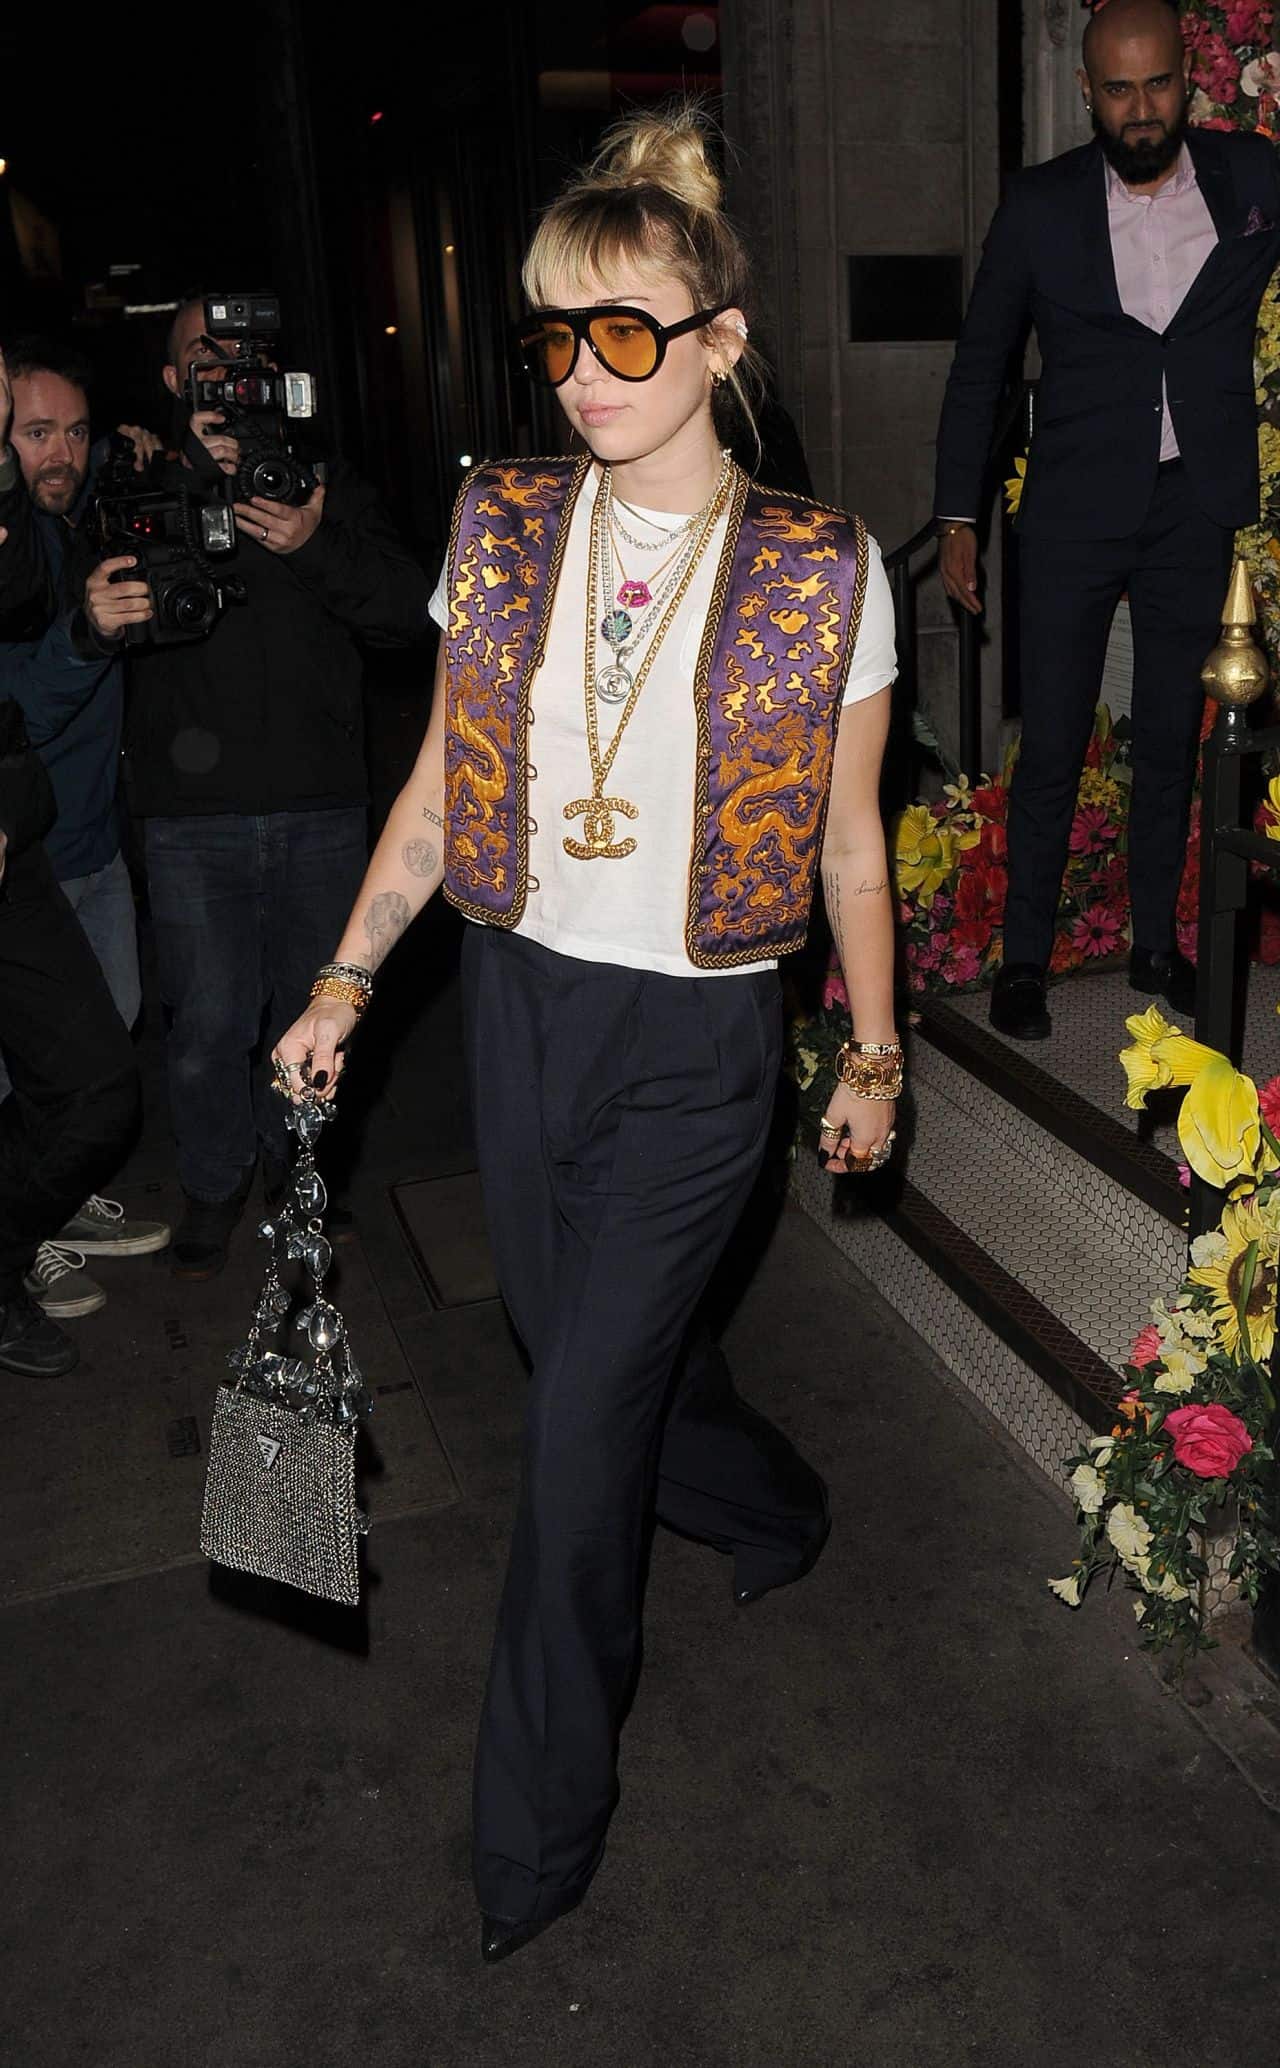 Miley Cyrus Shows Off Her Unique Chic Style in London